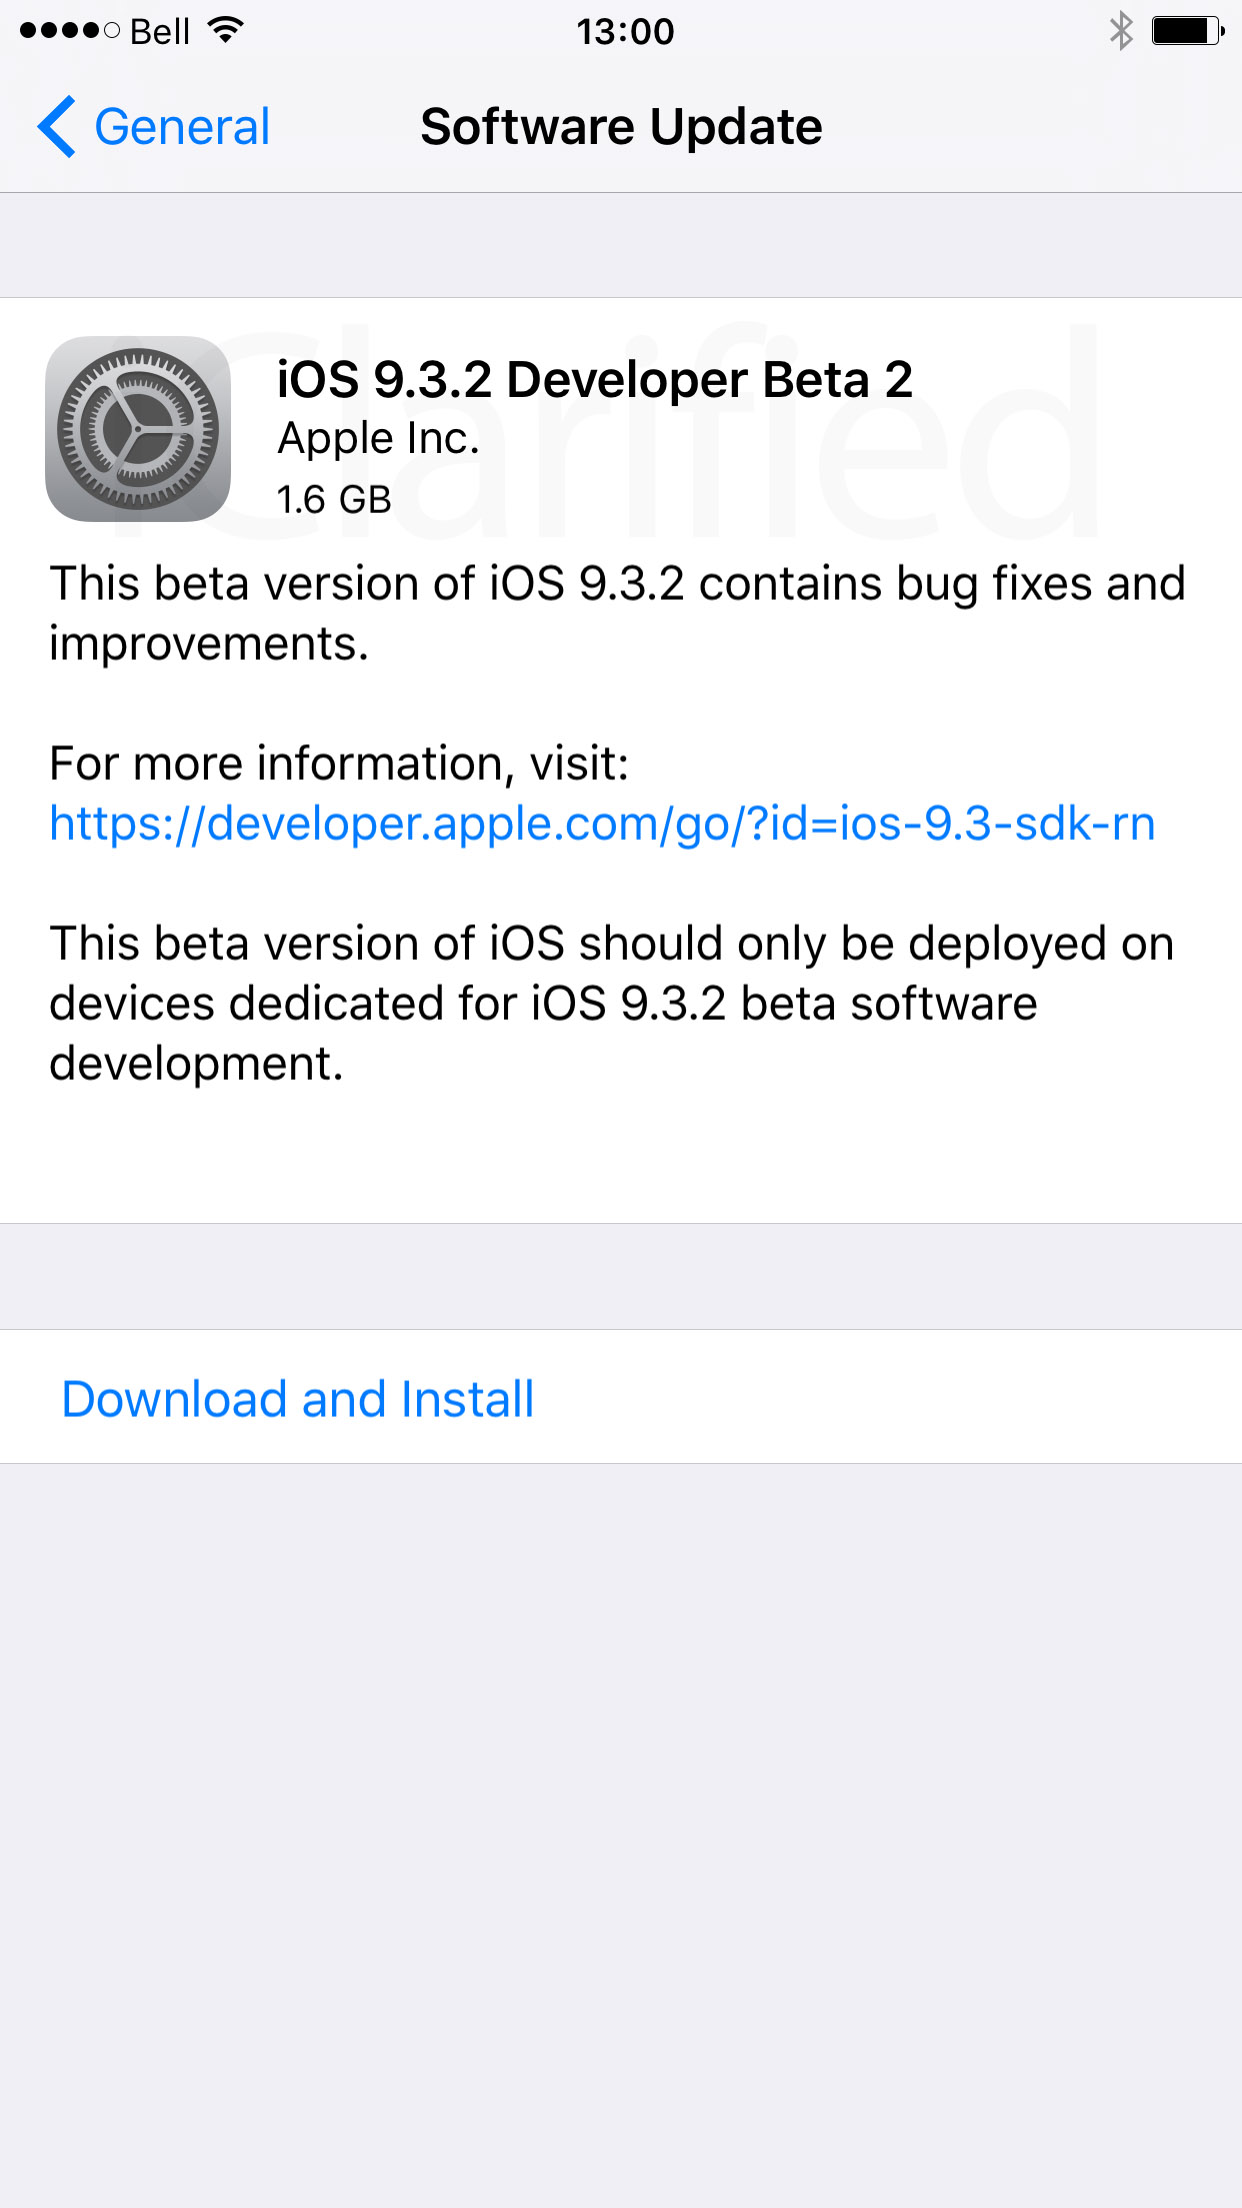 Apple Releases iOS 9.3.2 Beta 2 to Developers for Testing